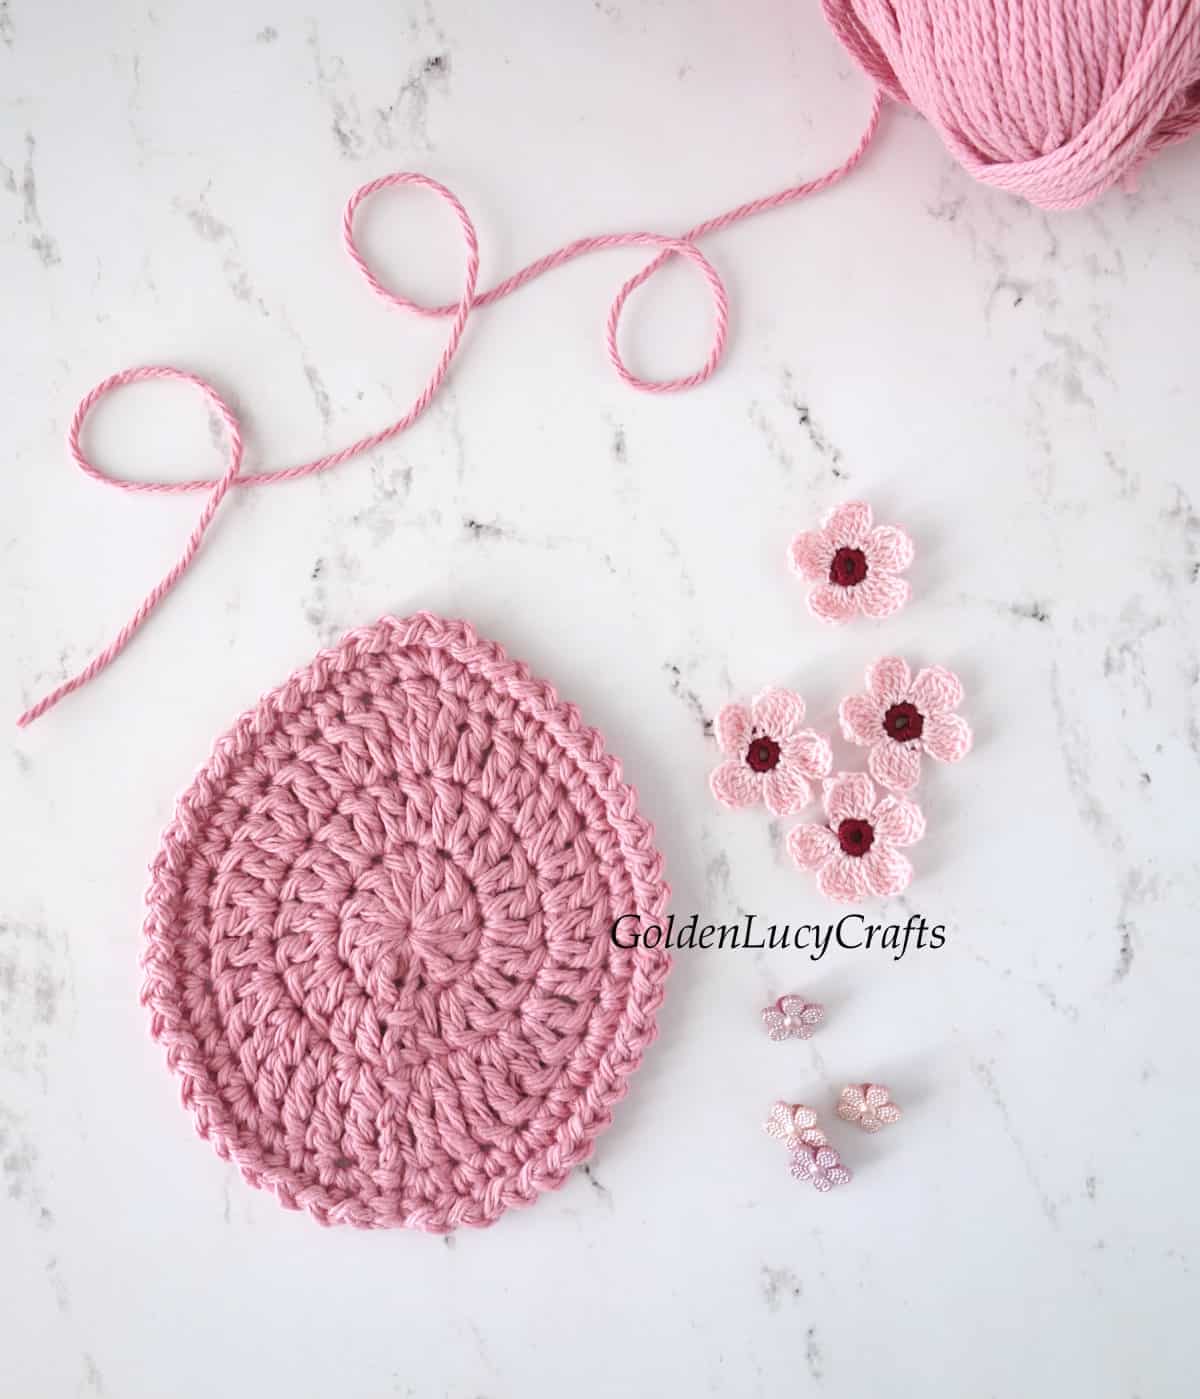 Crocheted flat egg shape, four small flowers, buttons and skein of yarn.